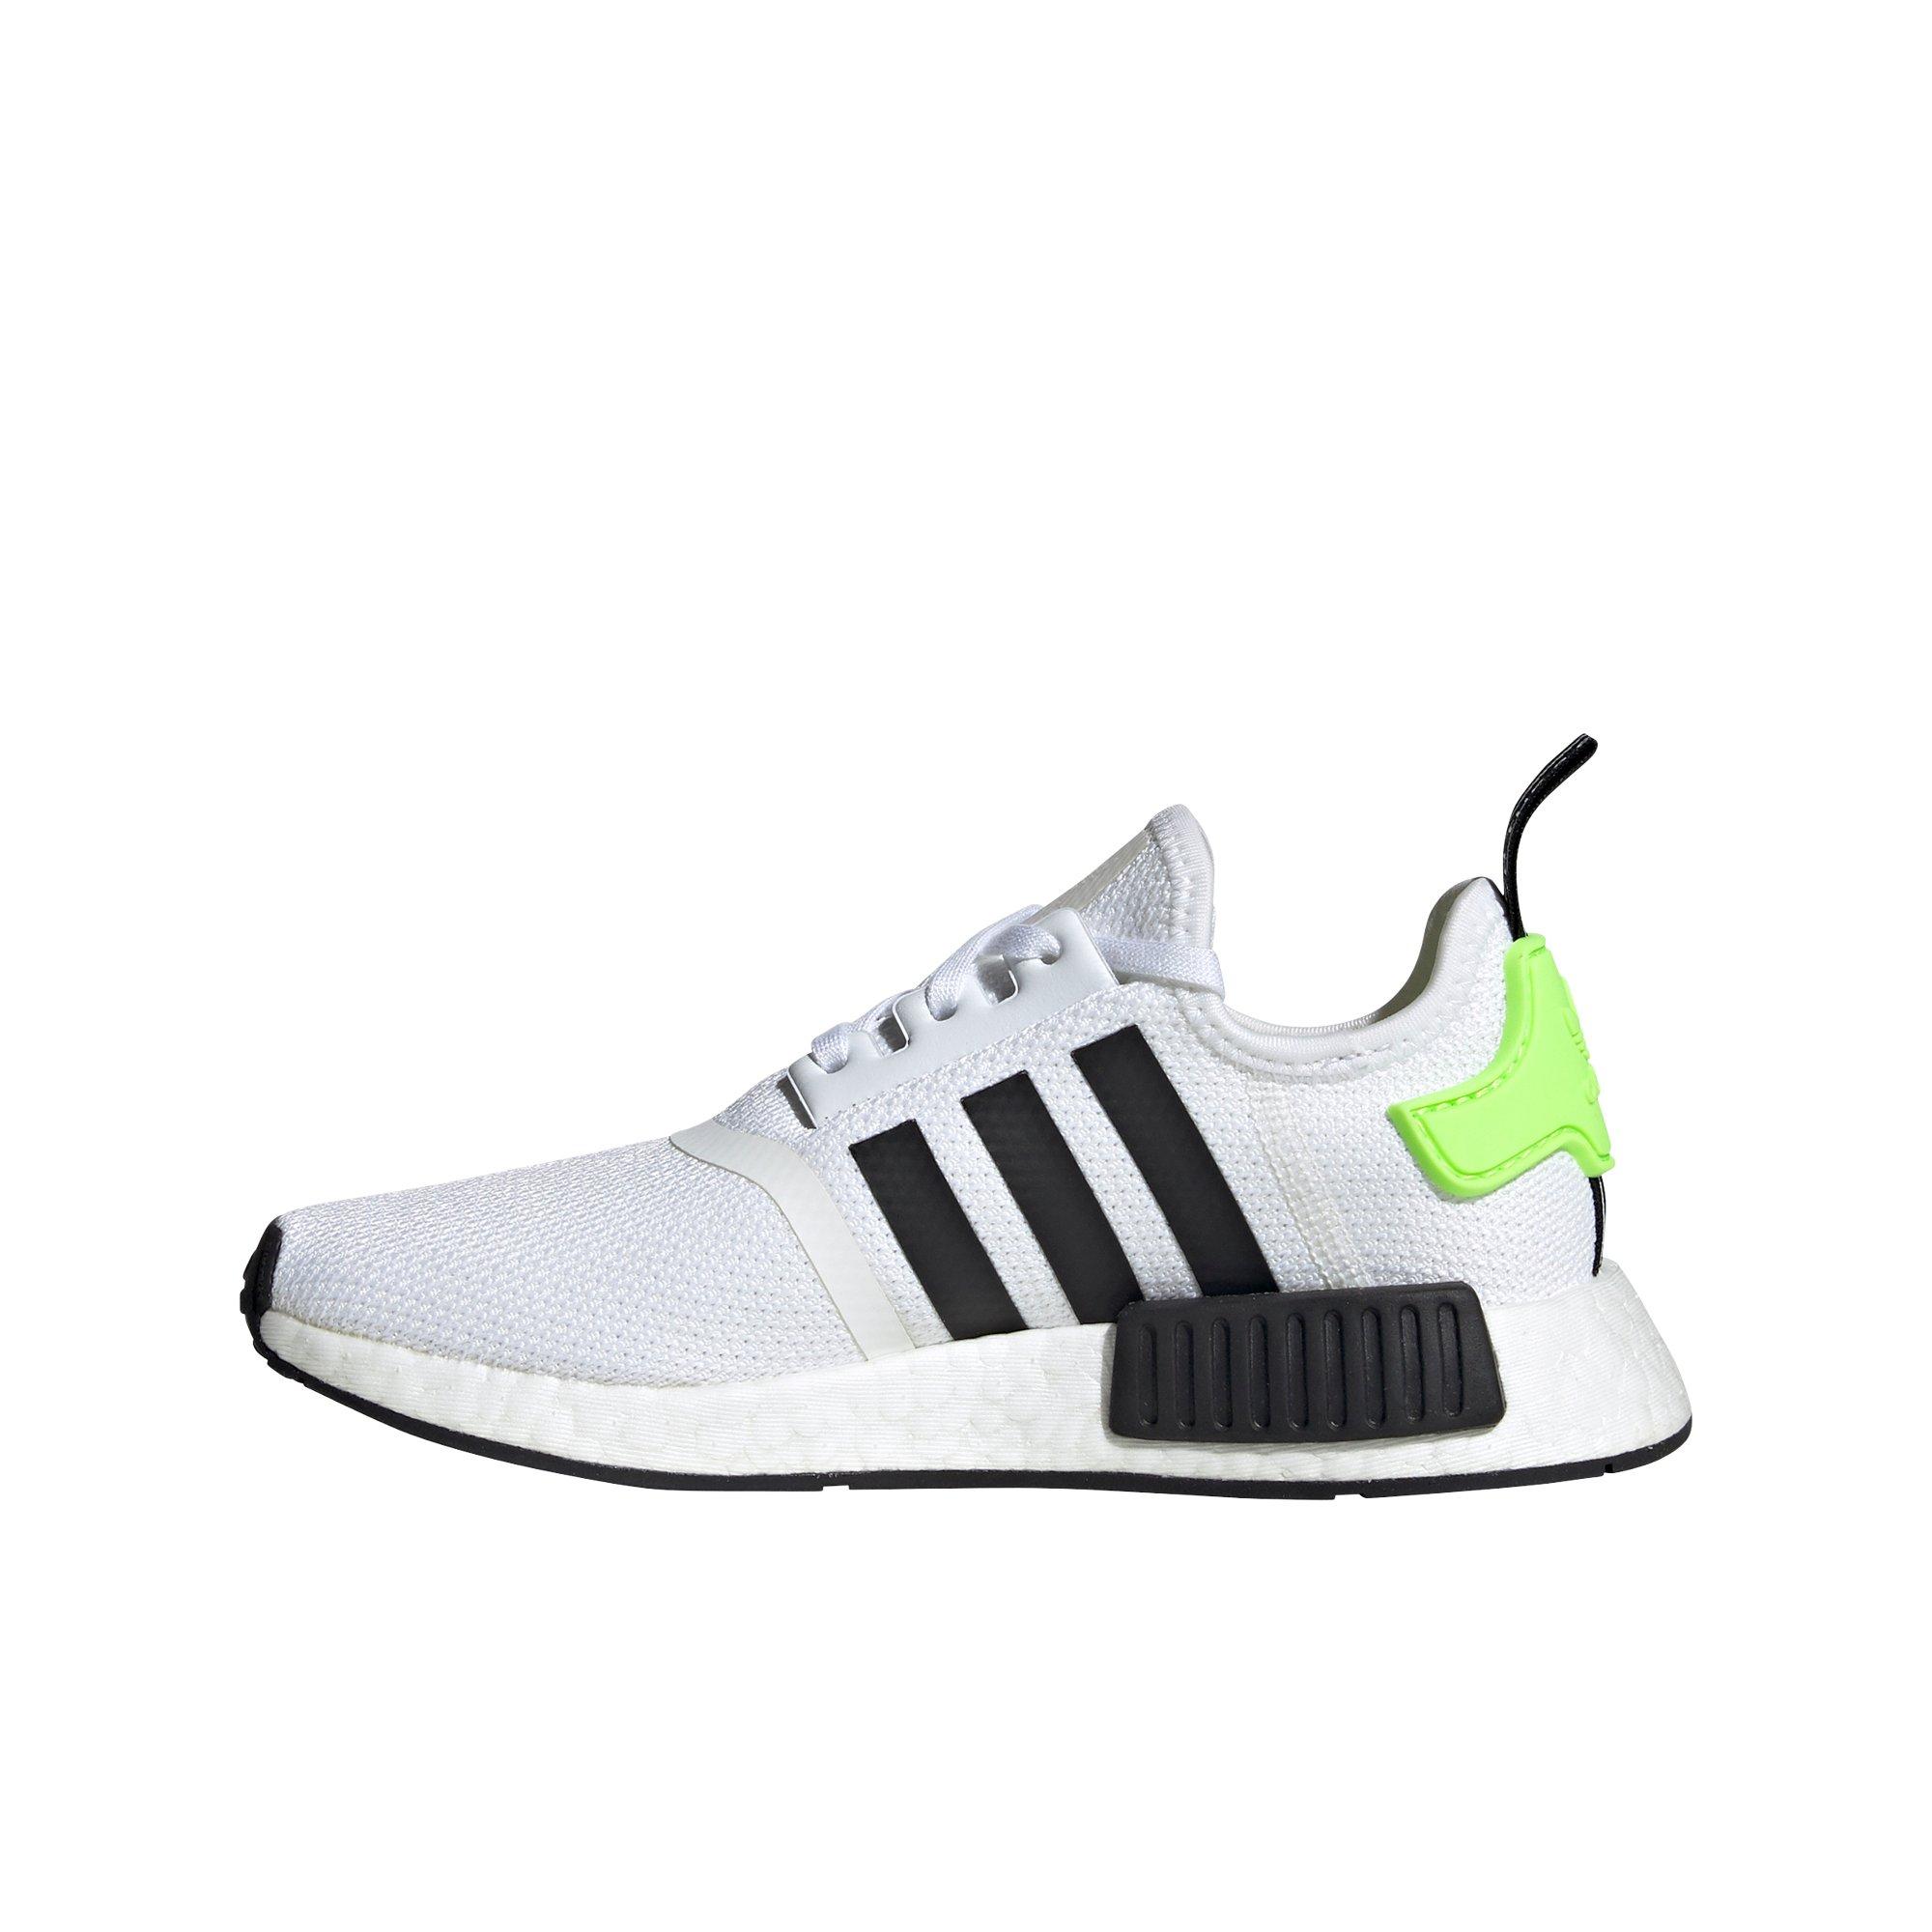 nmd r1 lime green